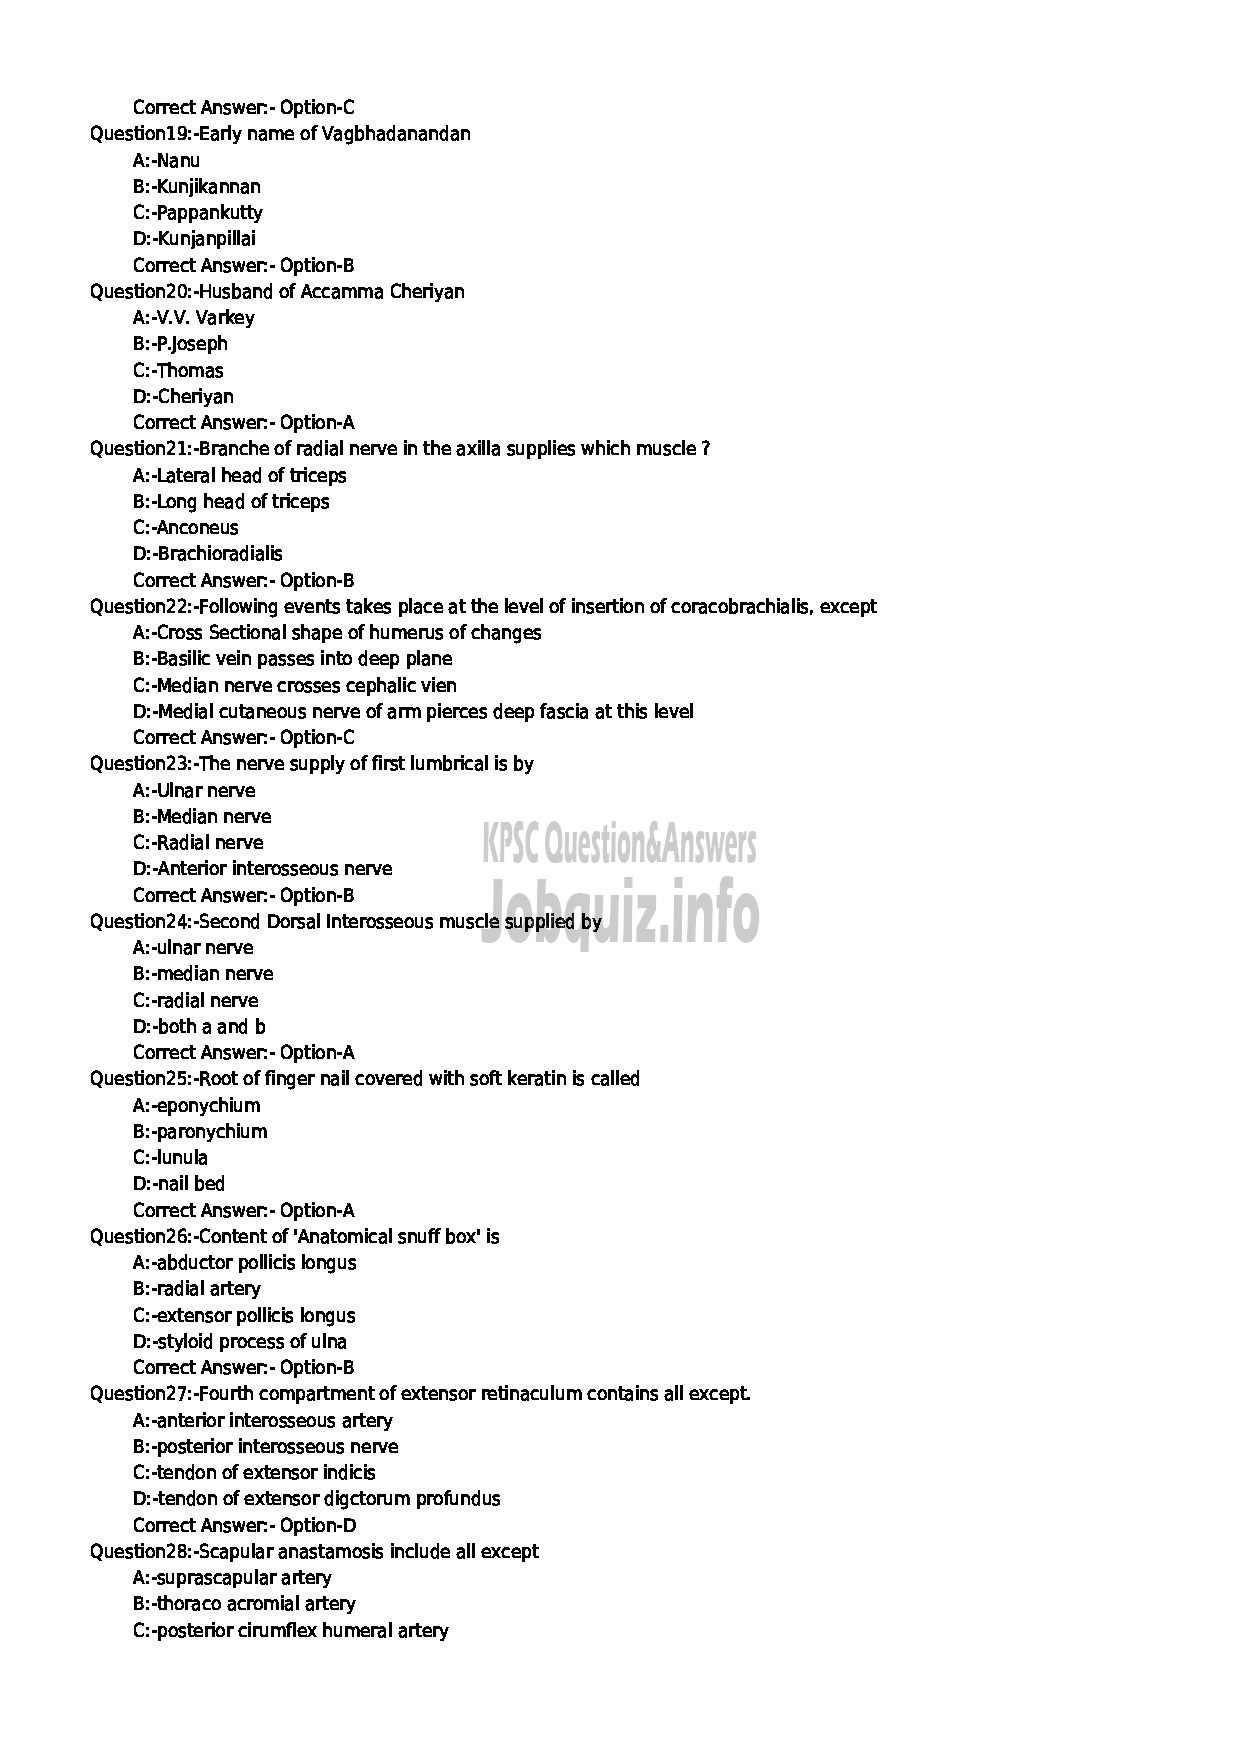 Kerala PSC Question Paper - SENIOR LECTURER IN ANATOMY NCA MEDICAL EDUCATION-3